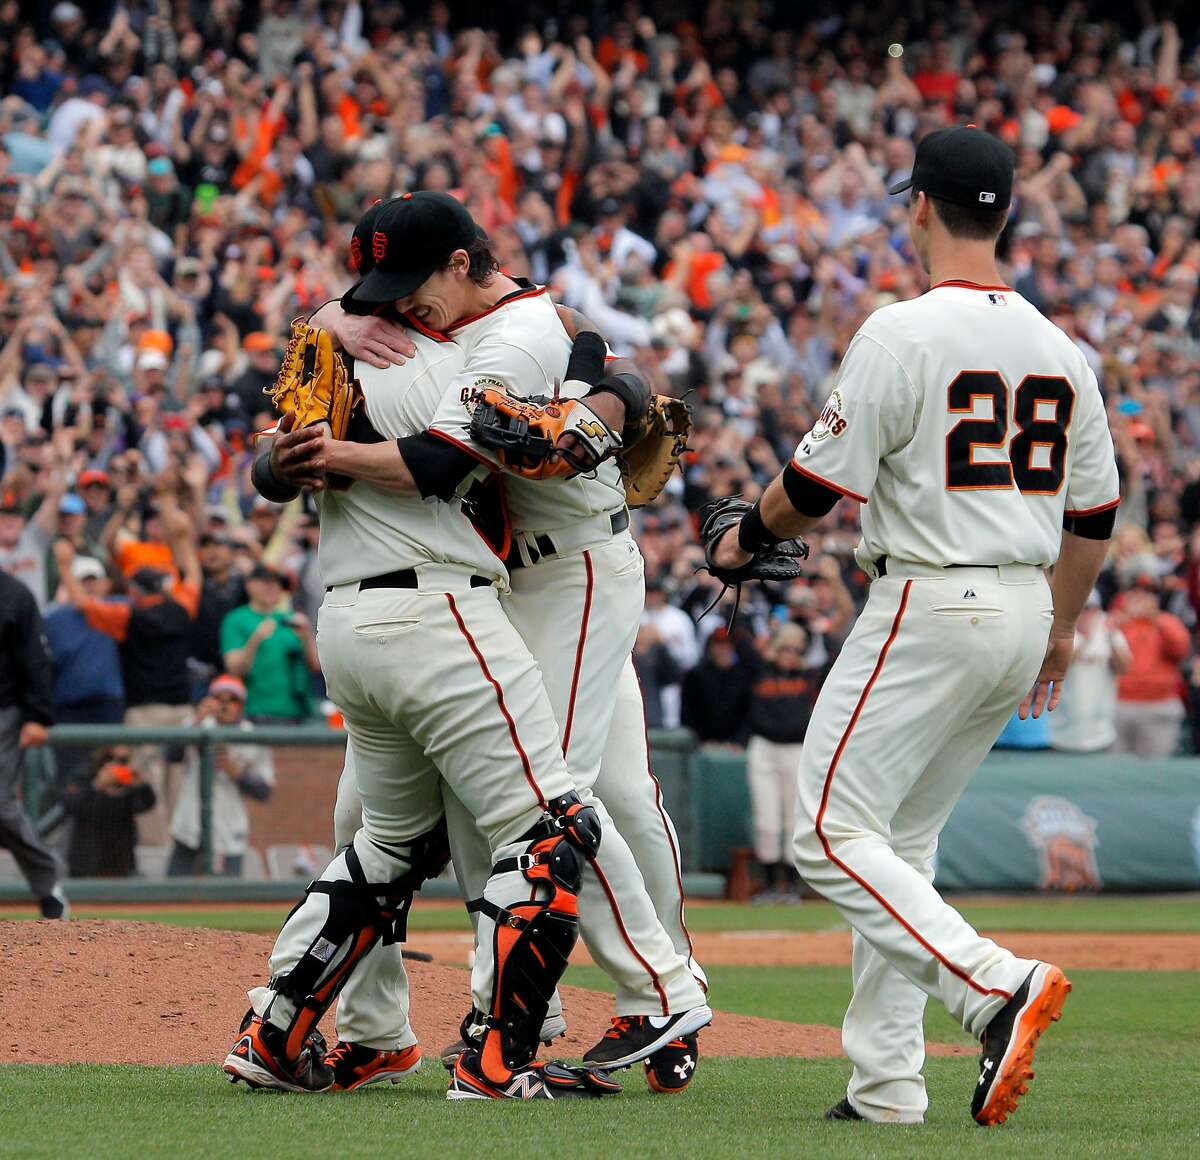 Pitcher Tim Lincecum, center, is mobbed by teammates after he pitched a no hitter as the San Francisco Giants played the San Diego Padres at AT&T Park in San Francisco, Calif., on Wednesday, June 25, 2014, defeating the Padres 4-0.